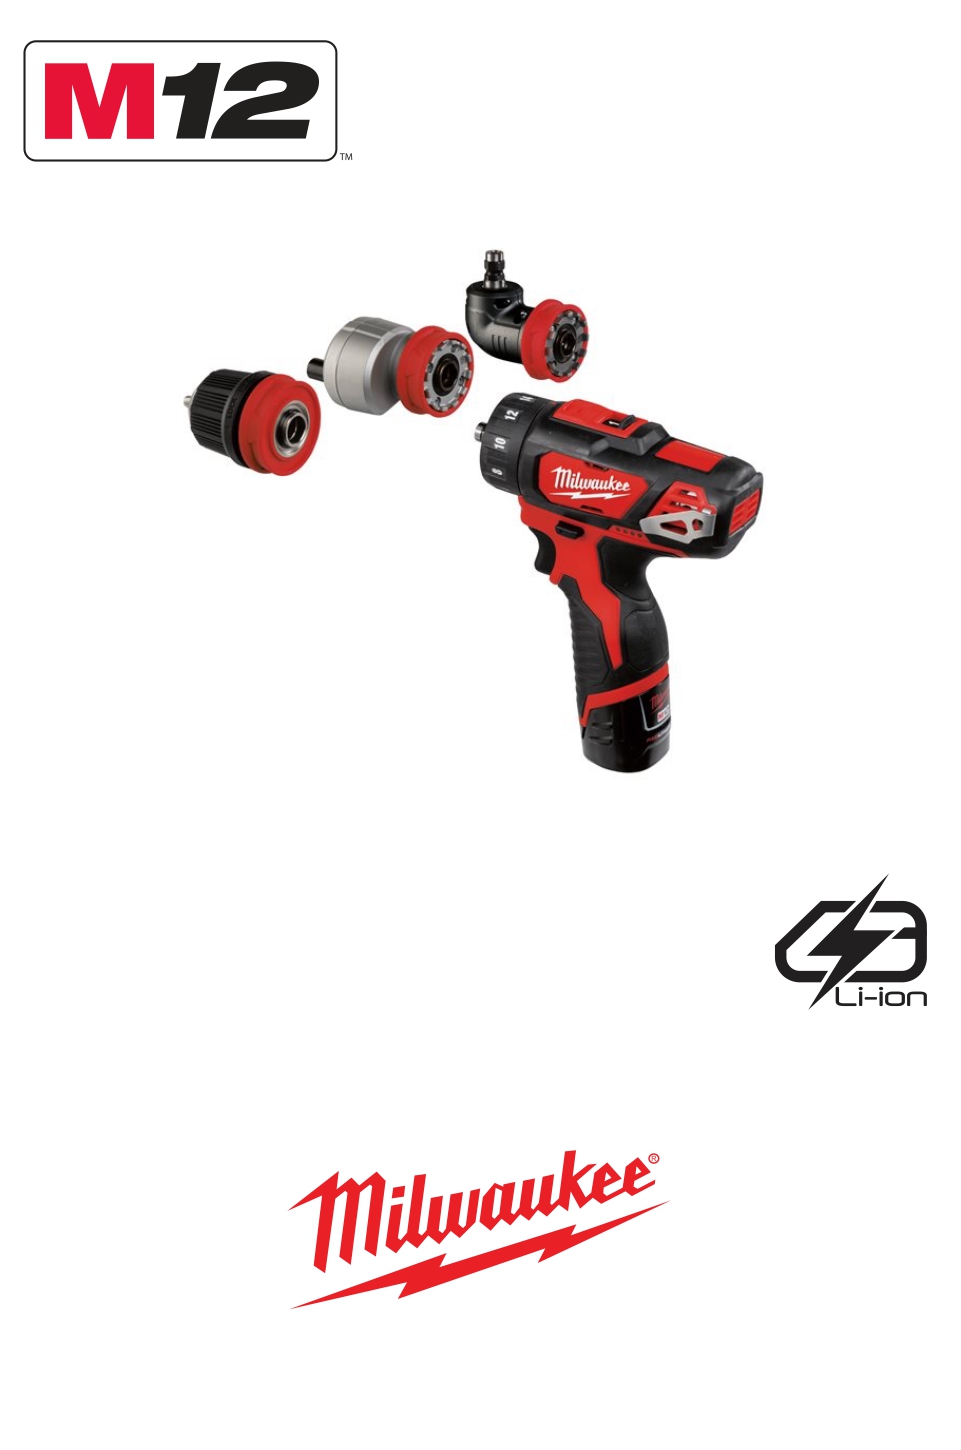 Imexco, SUB COMPACT  CORDLESS DRILL DRIVER WITH REMOVBLE CHUCK 12V  M12 BDDX